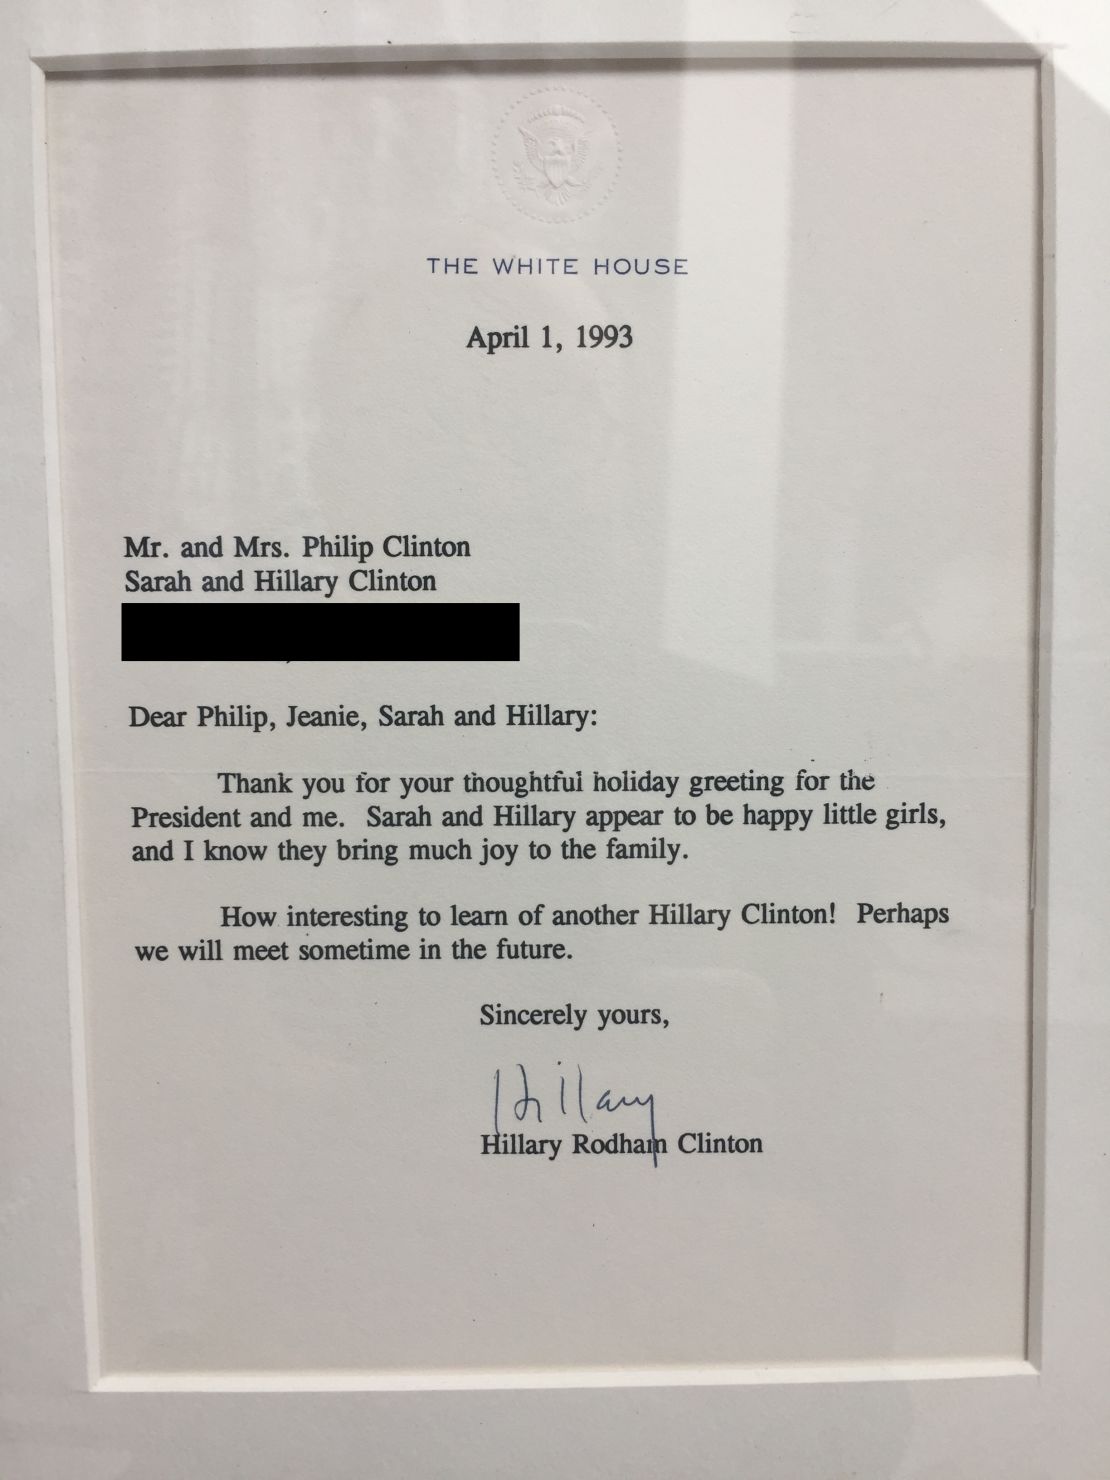 First Lady Hillary Clinton replied to a letter sent by her namesake's mother in 1993